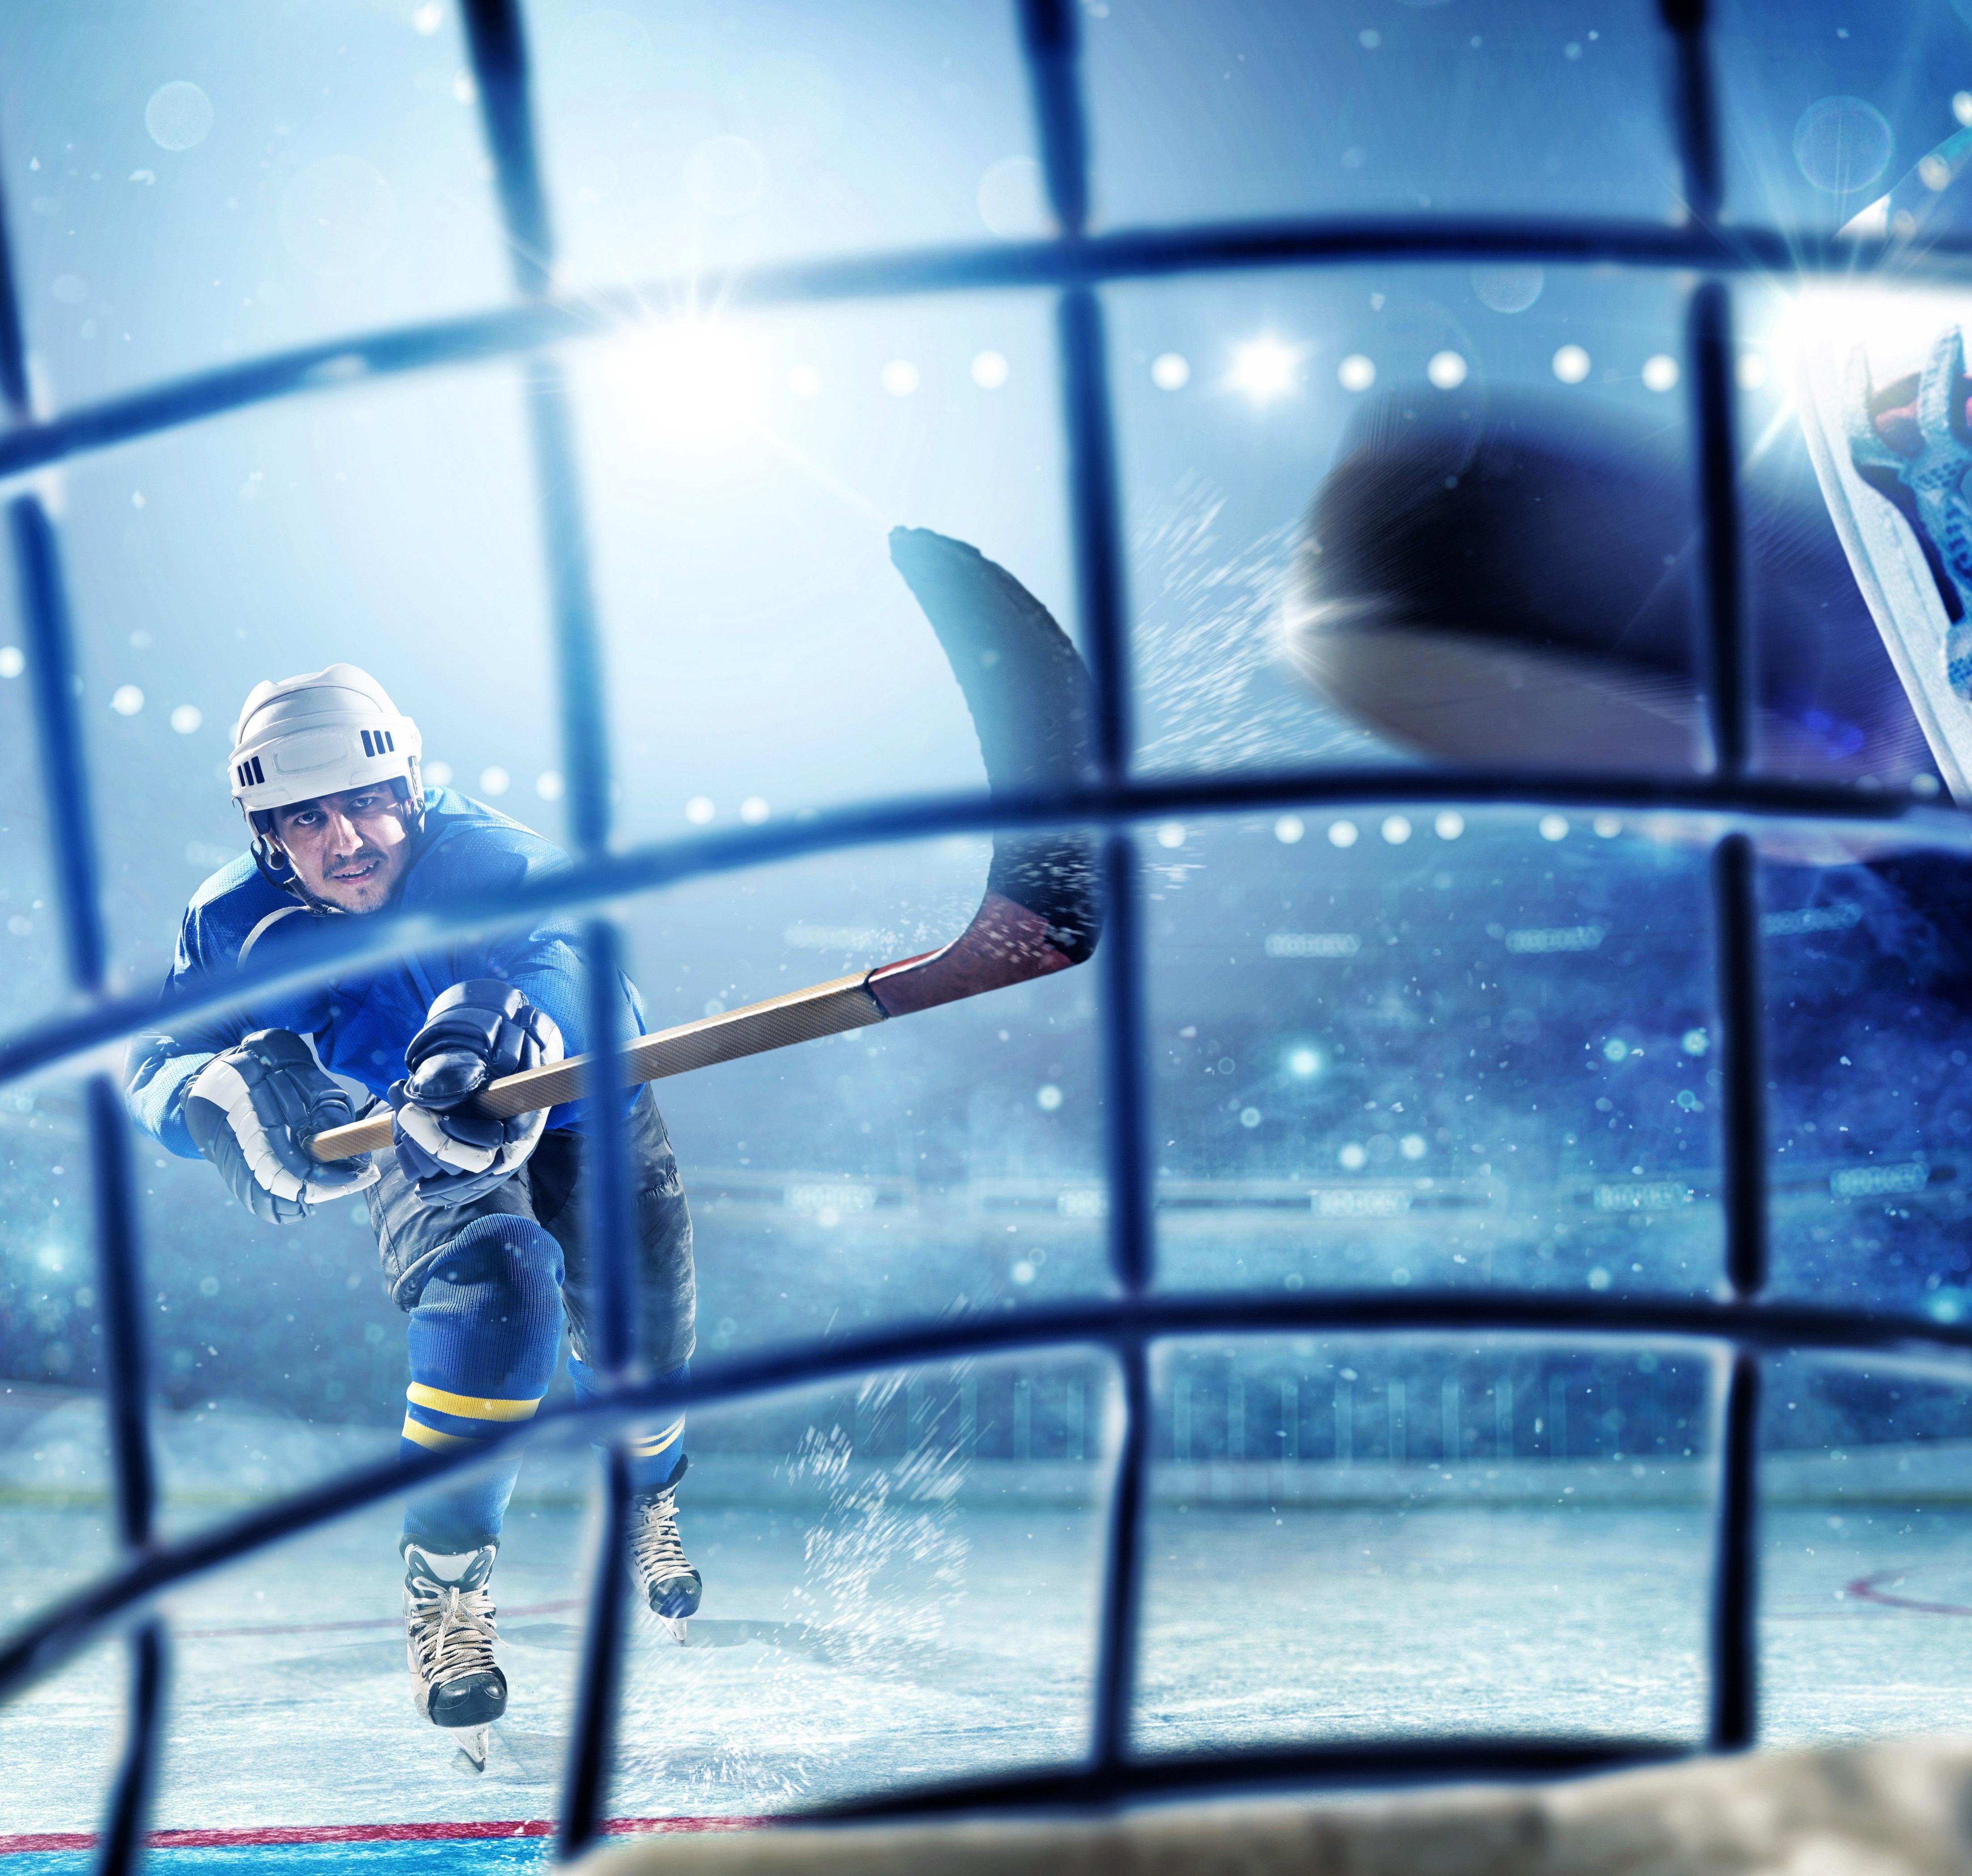 Ice hockey player trying to score